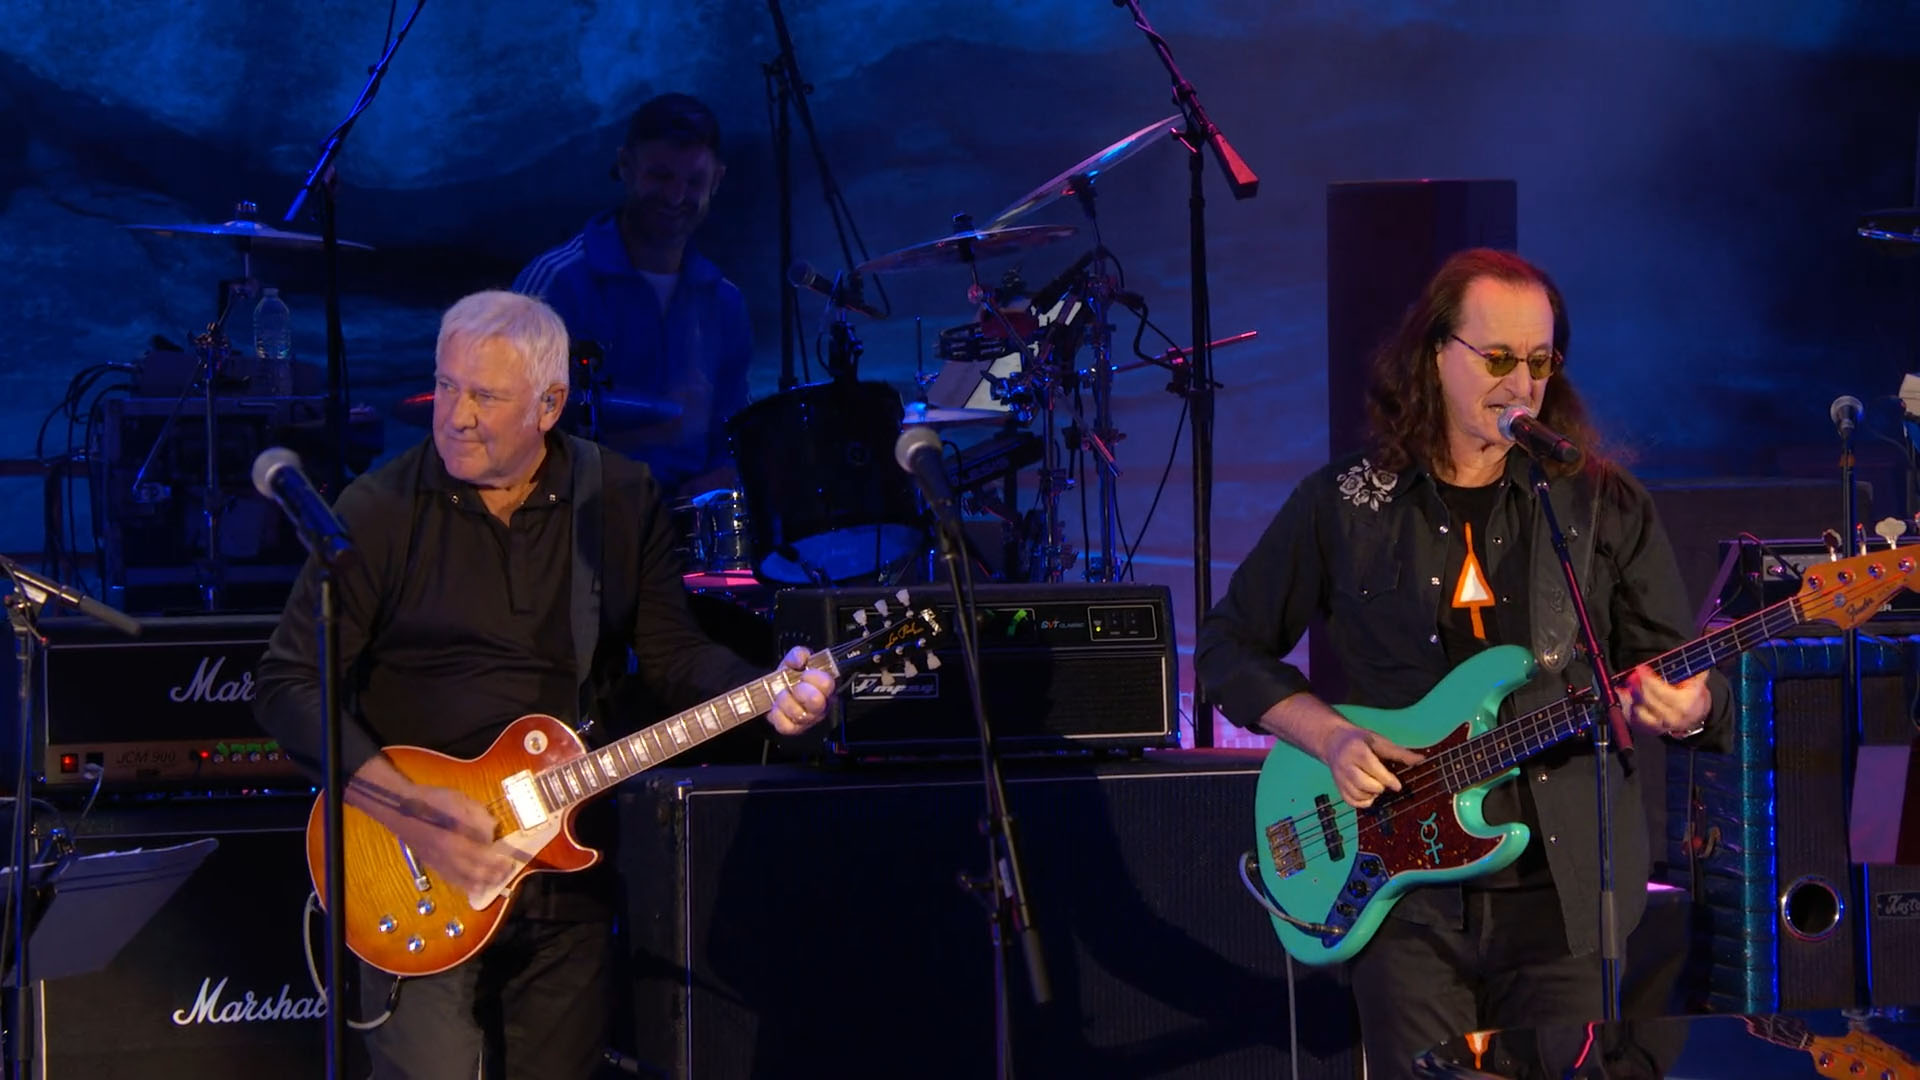 South Park 25th Anniversary Concert Photos - Geddy Lee and Alex Lifeson Performance - Red Rocks Amphitheatre - Morrison, Colorado - August 10th, 2022